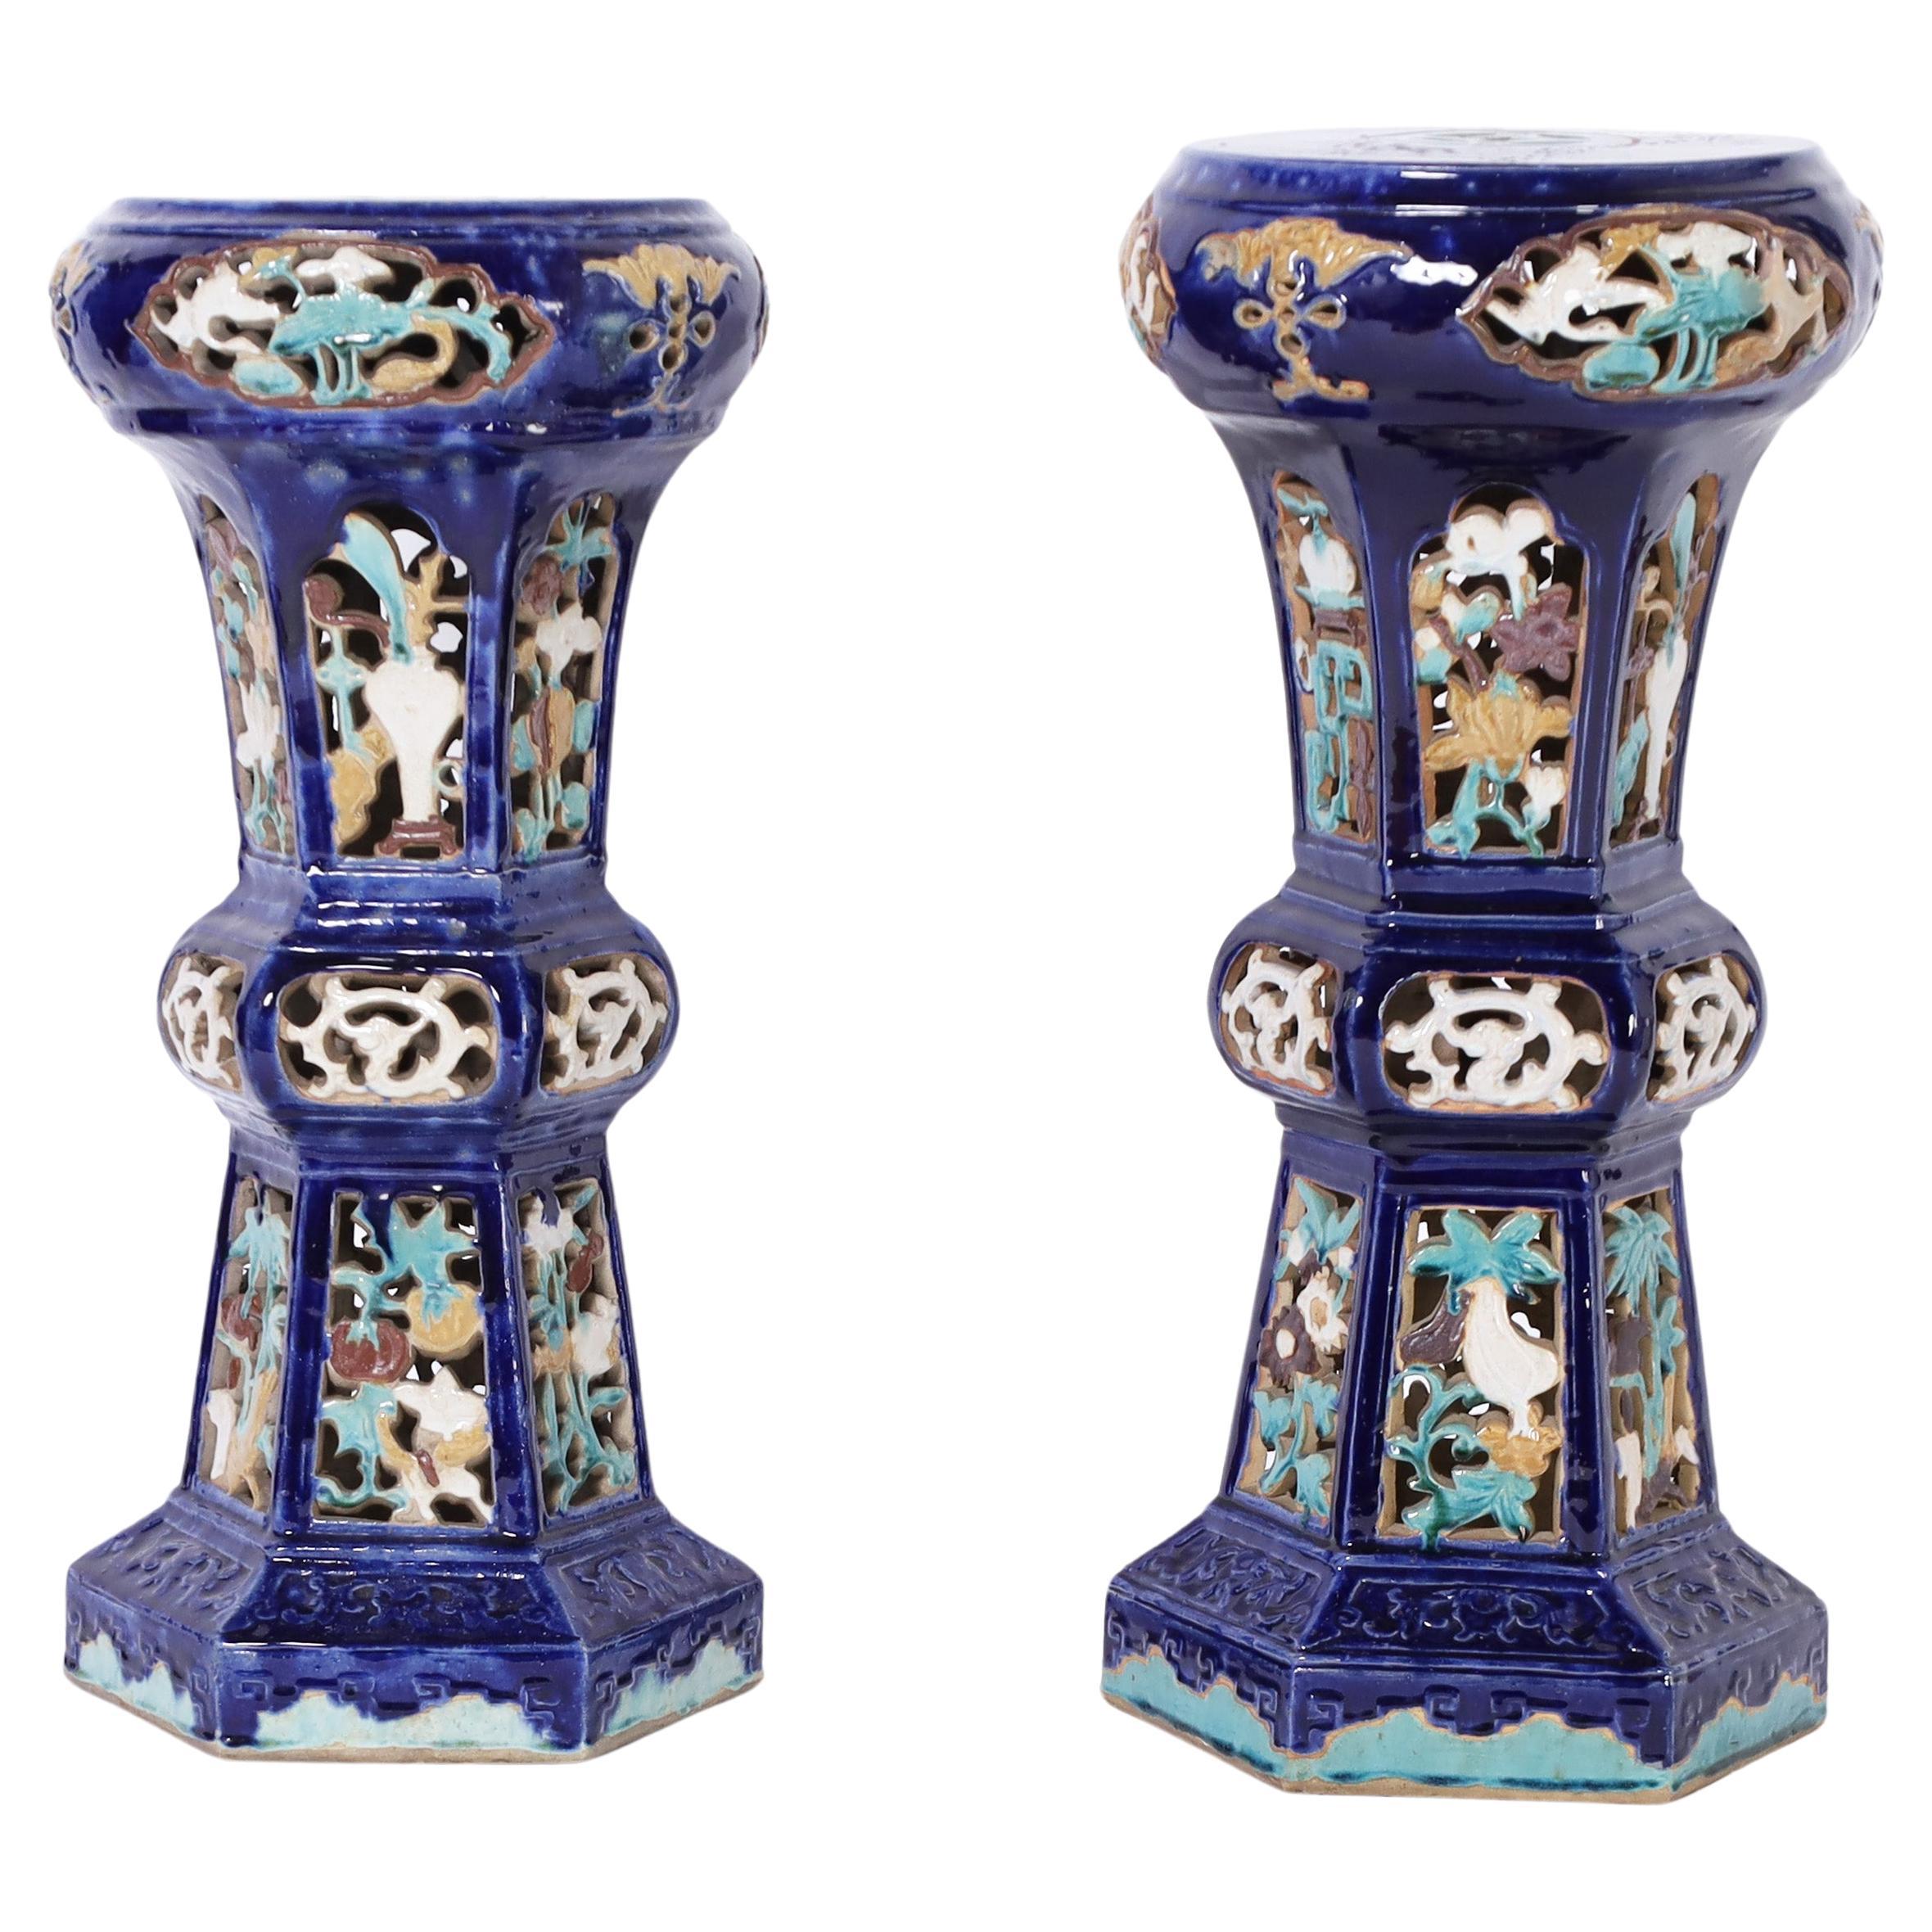 Near Pair of Chinese Glazed Terra Cotta Pedestals For Sale